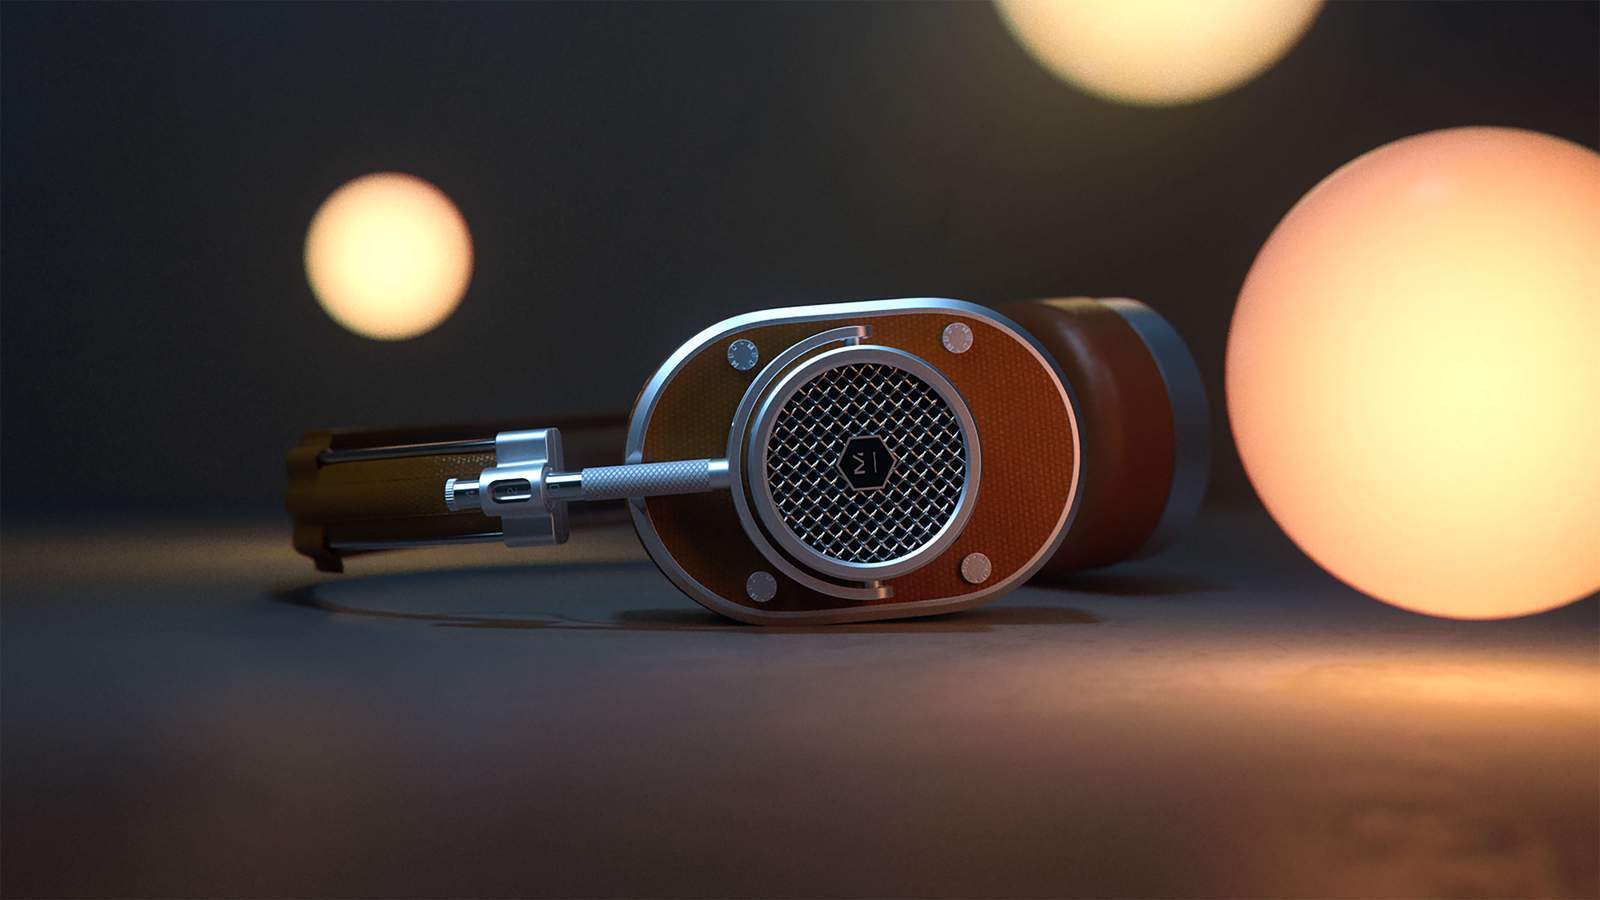 Master & Dynamic's iconic MH40 headphones were just re-released